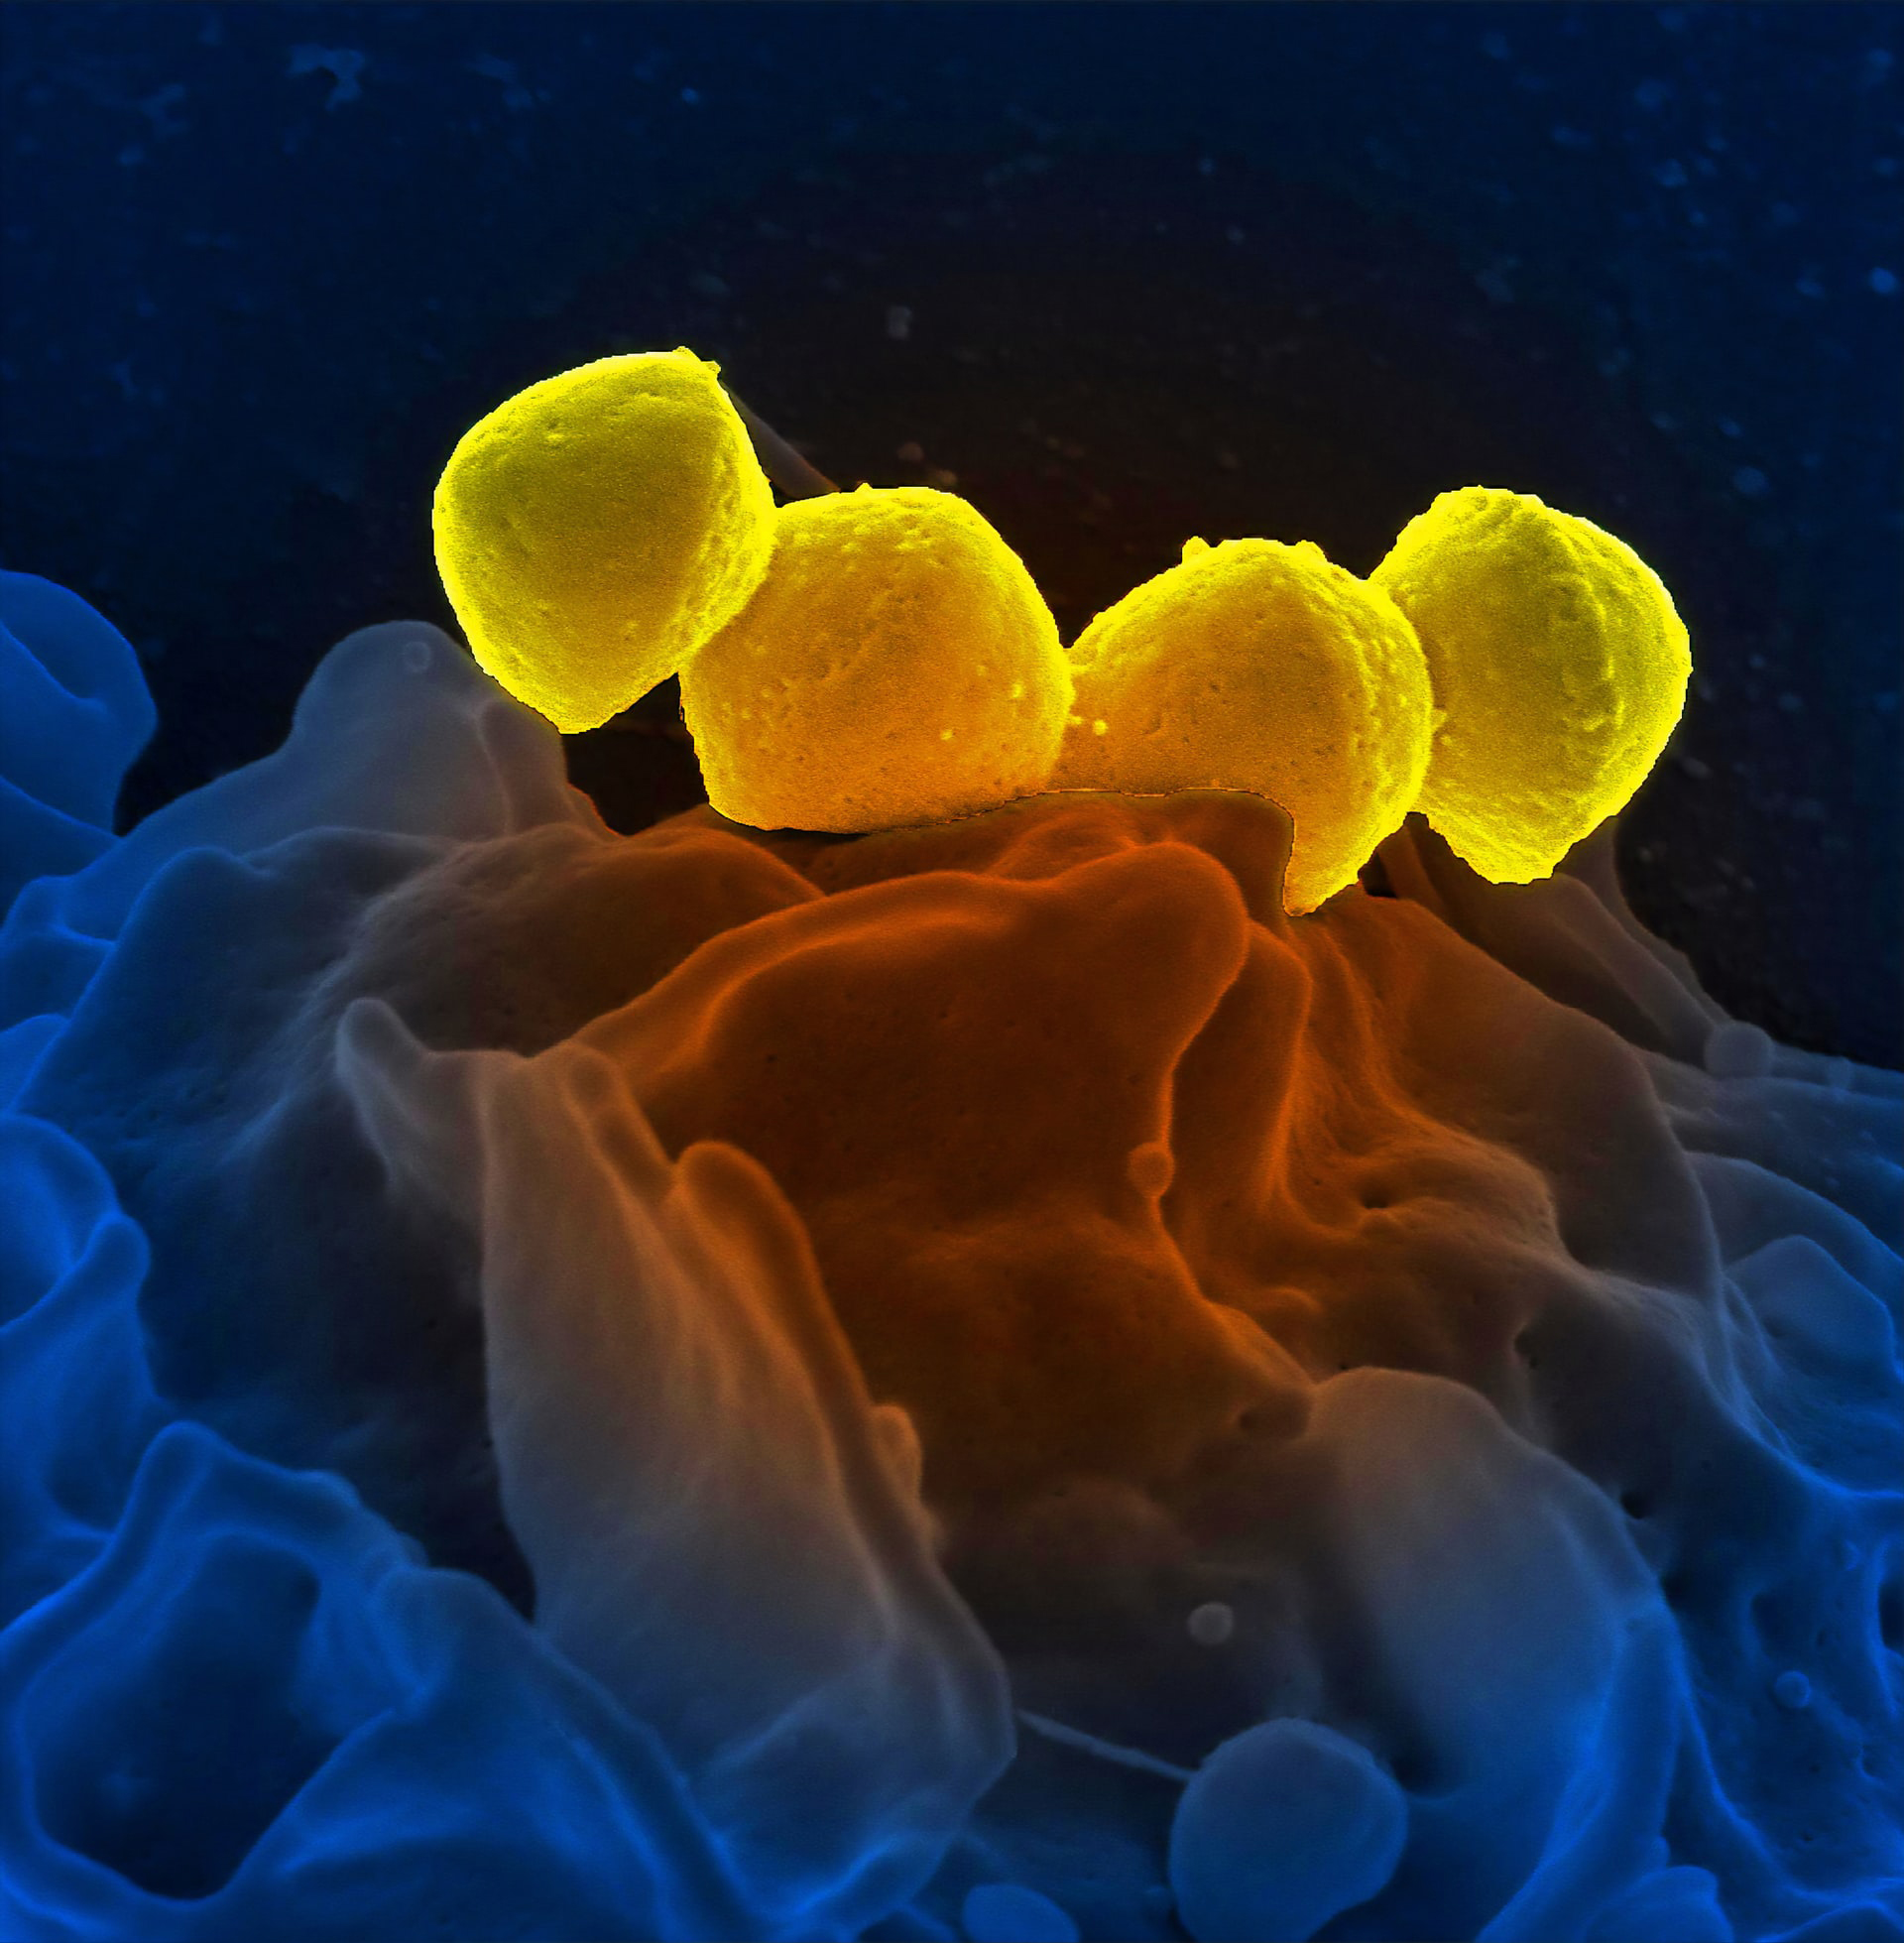 A microscope image from the CDC shows four yellow-colored orbs, which are bacteria, resting on the wavy surface of a white blood cell.